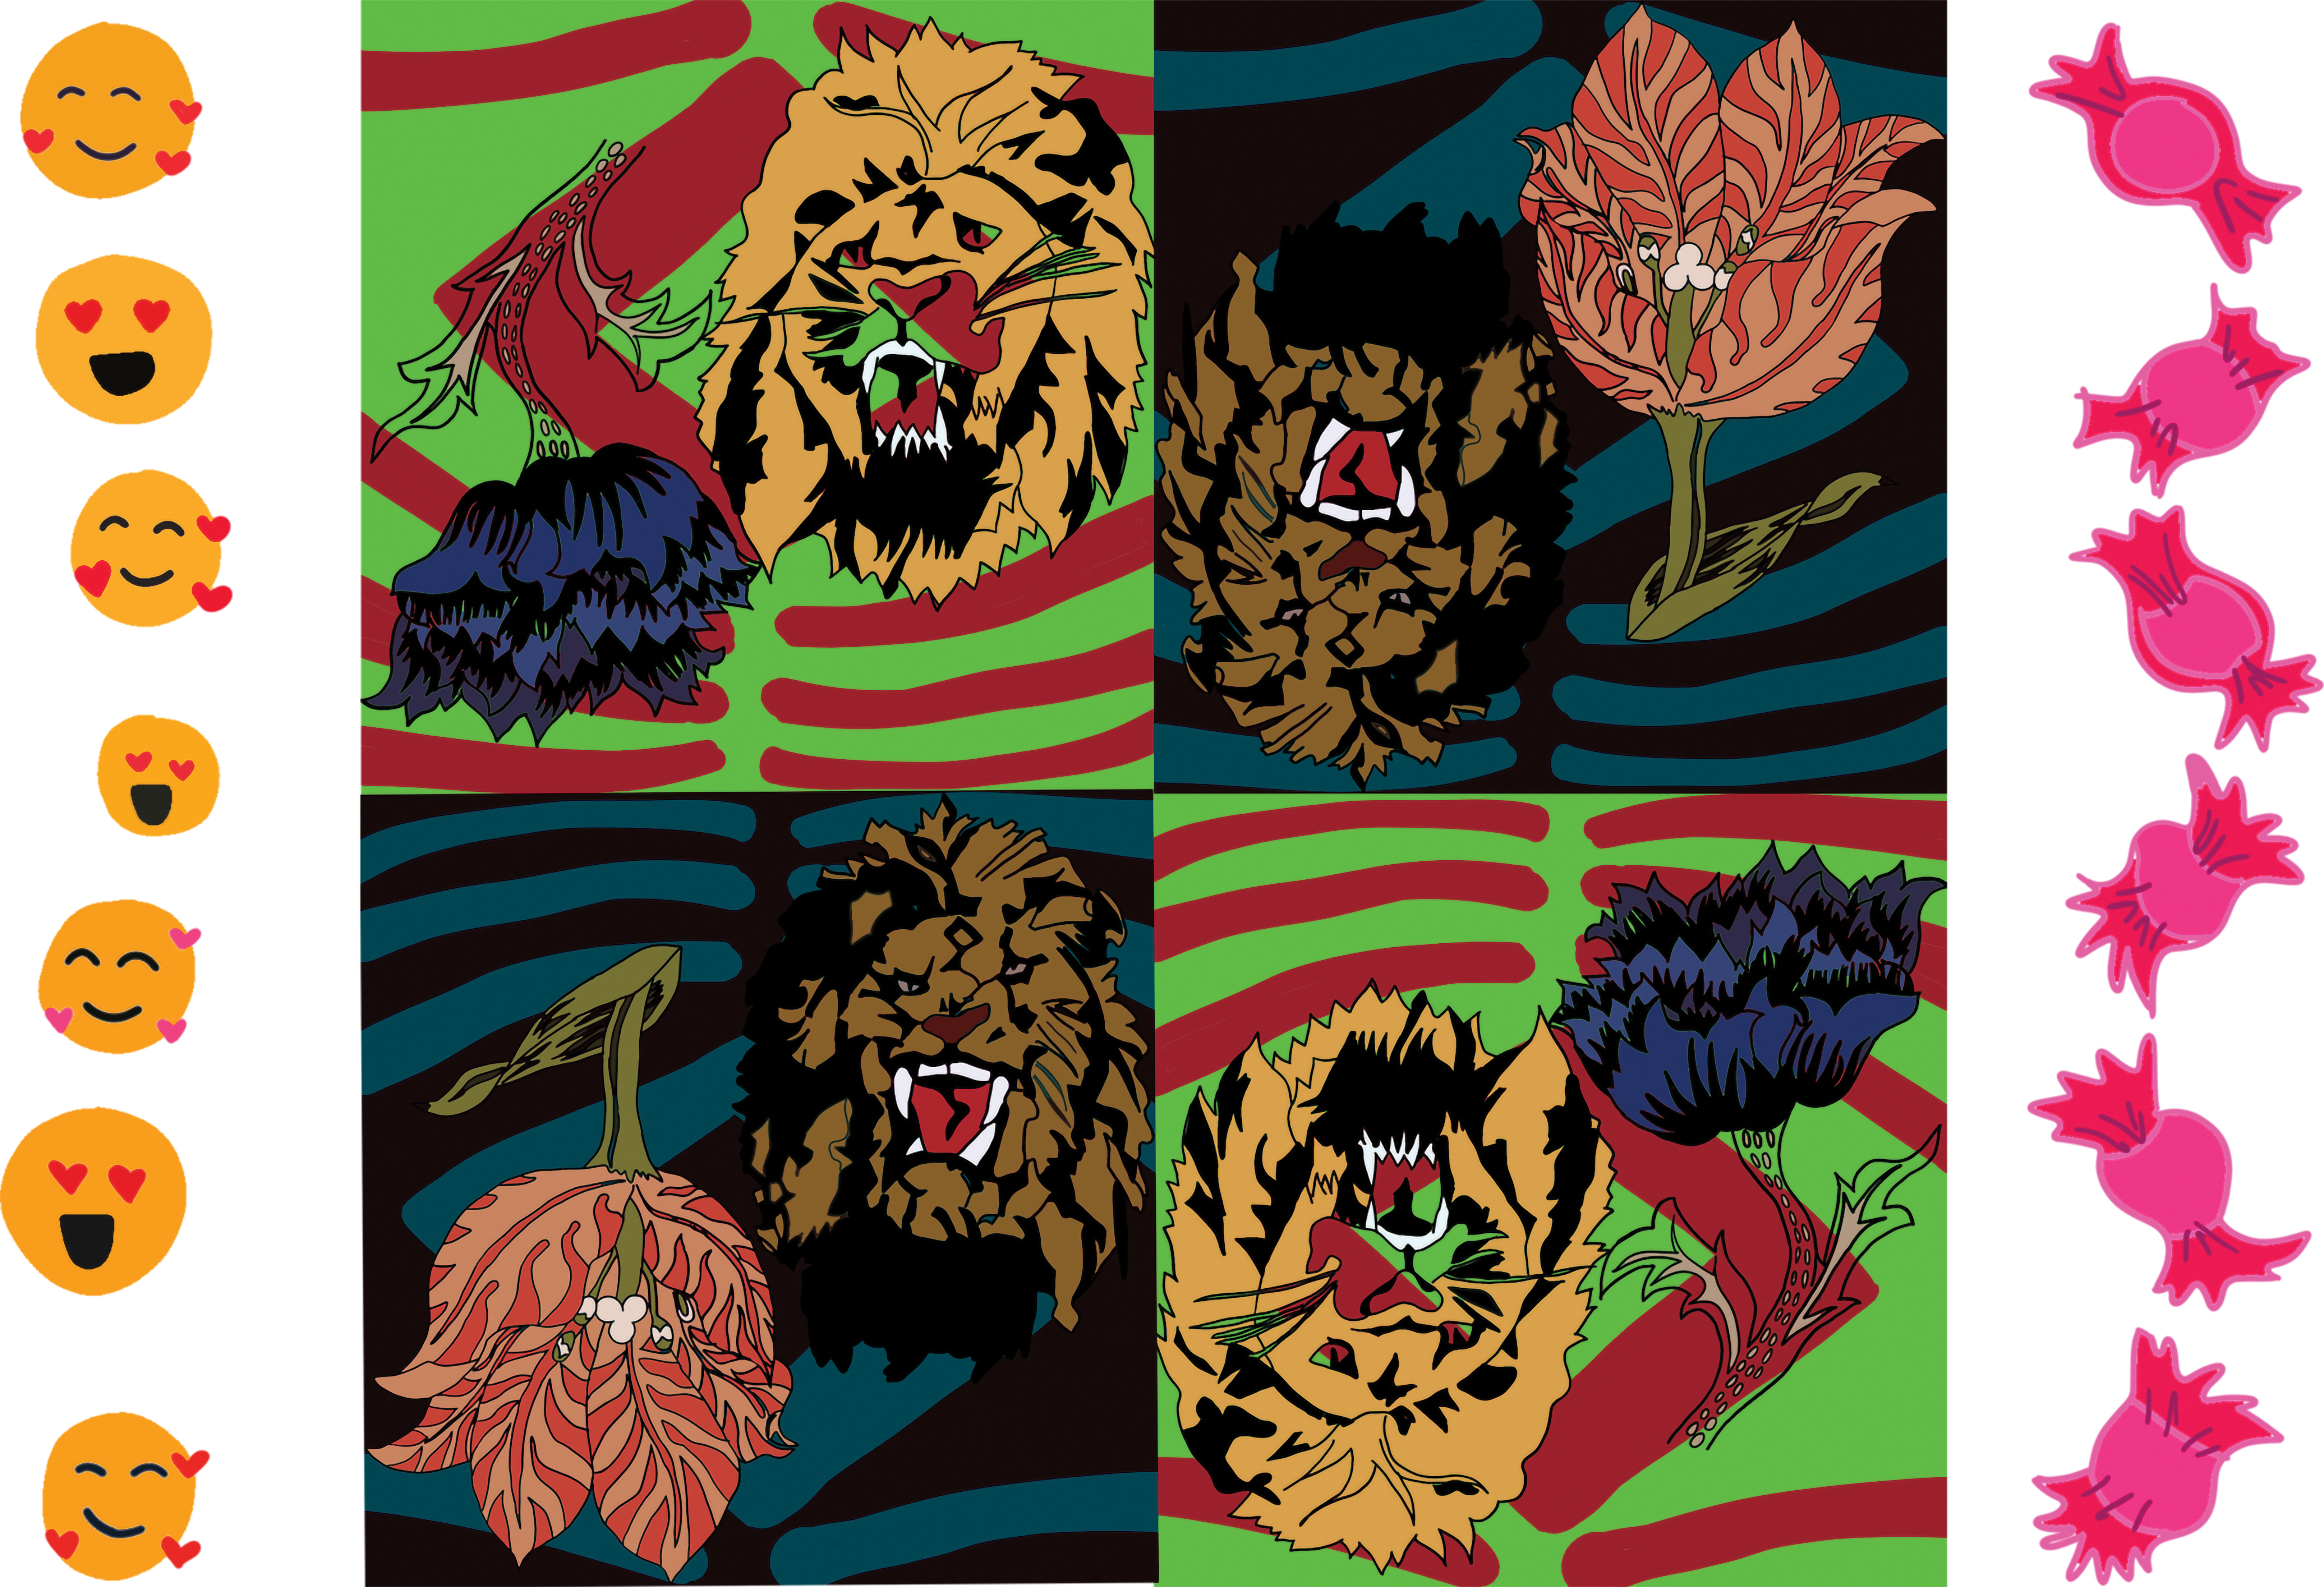 Yellow lion, blue flower against red and green background composed next to brown lion and oink flower against blue-green and black striped background, emojis from top to bottom on the left on composition and pink candies from top to bottom on right of composition